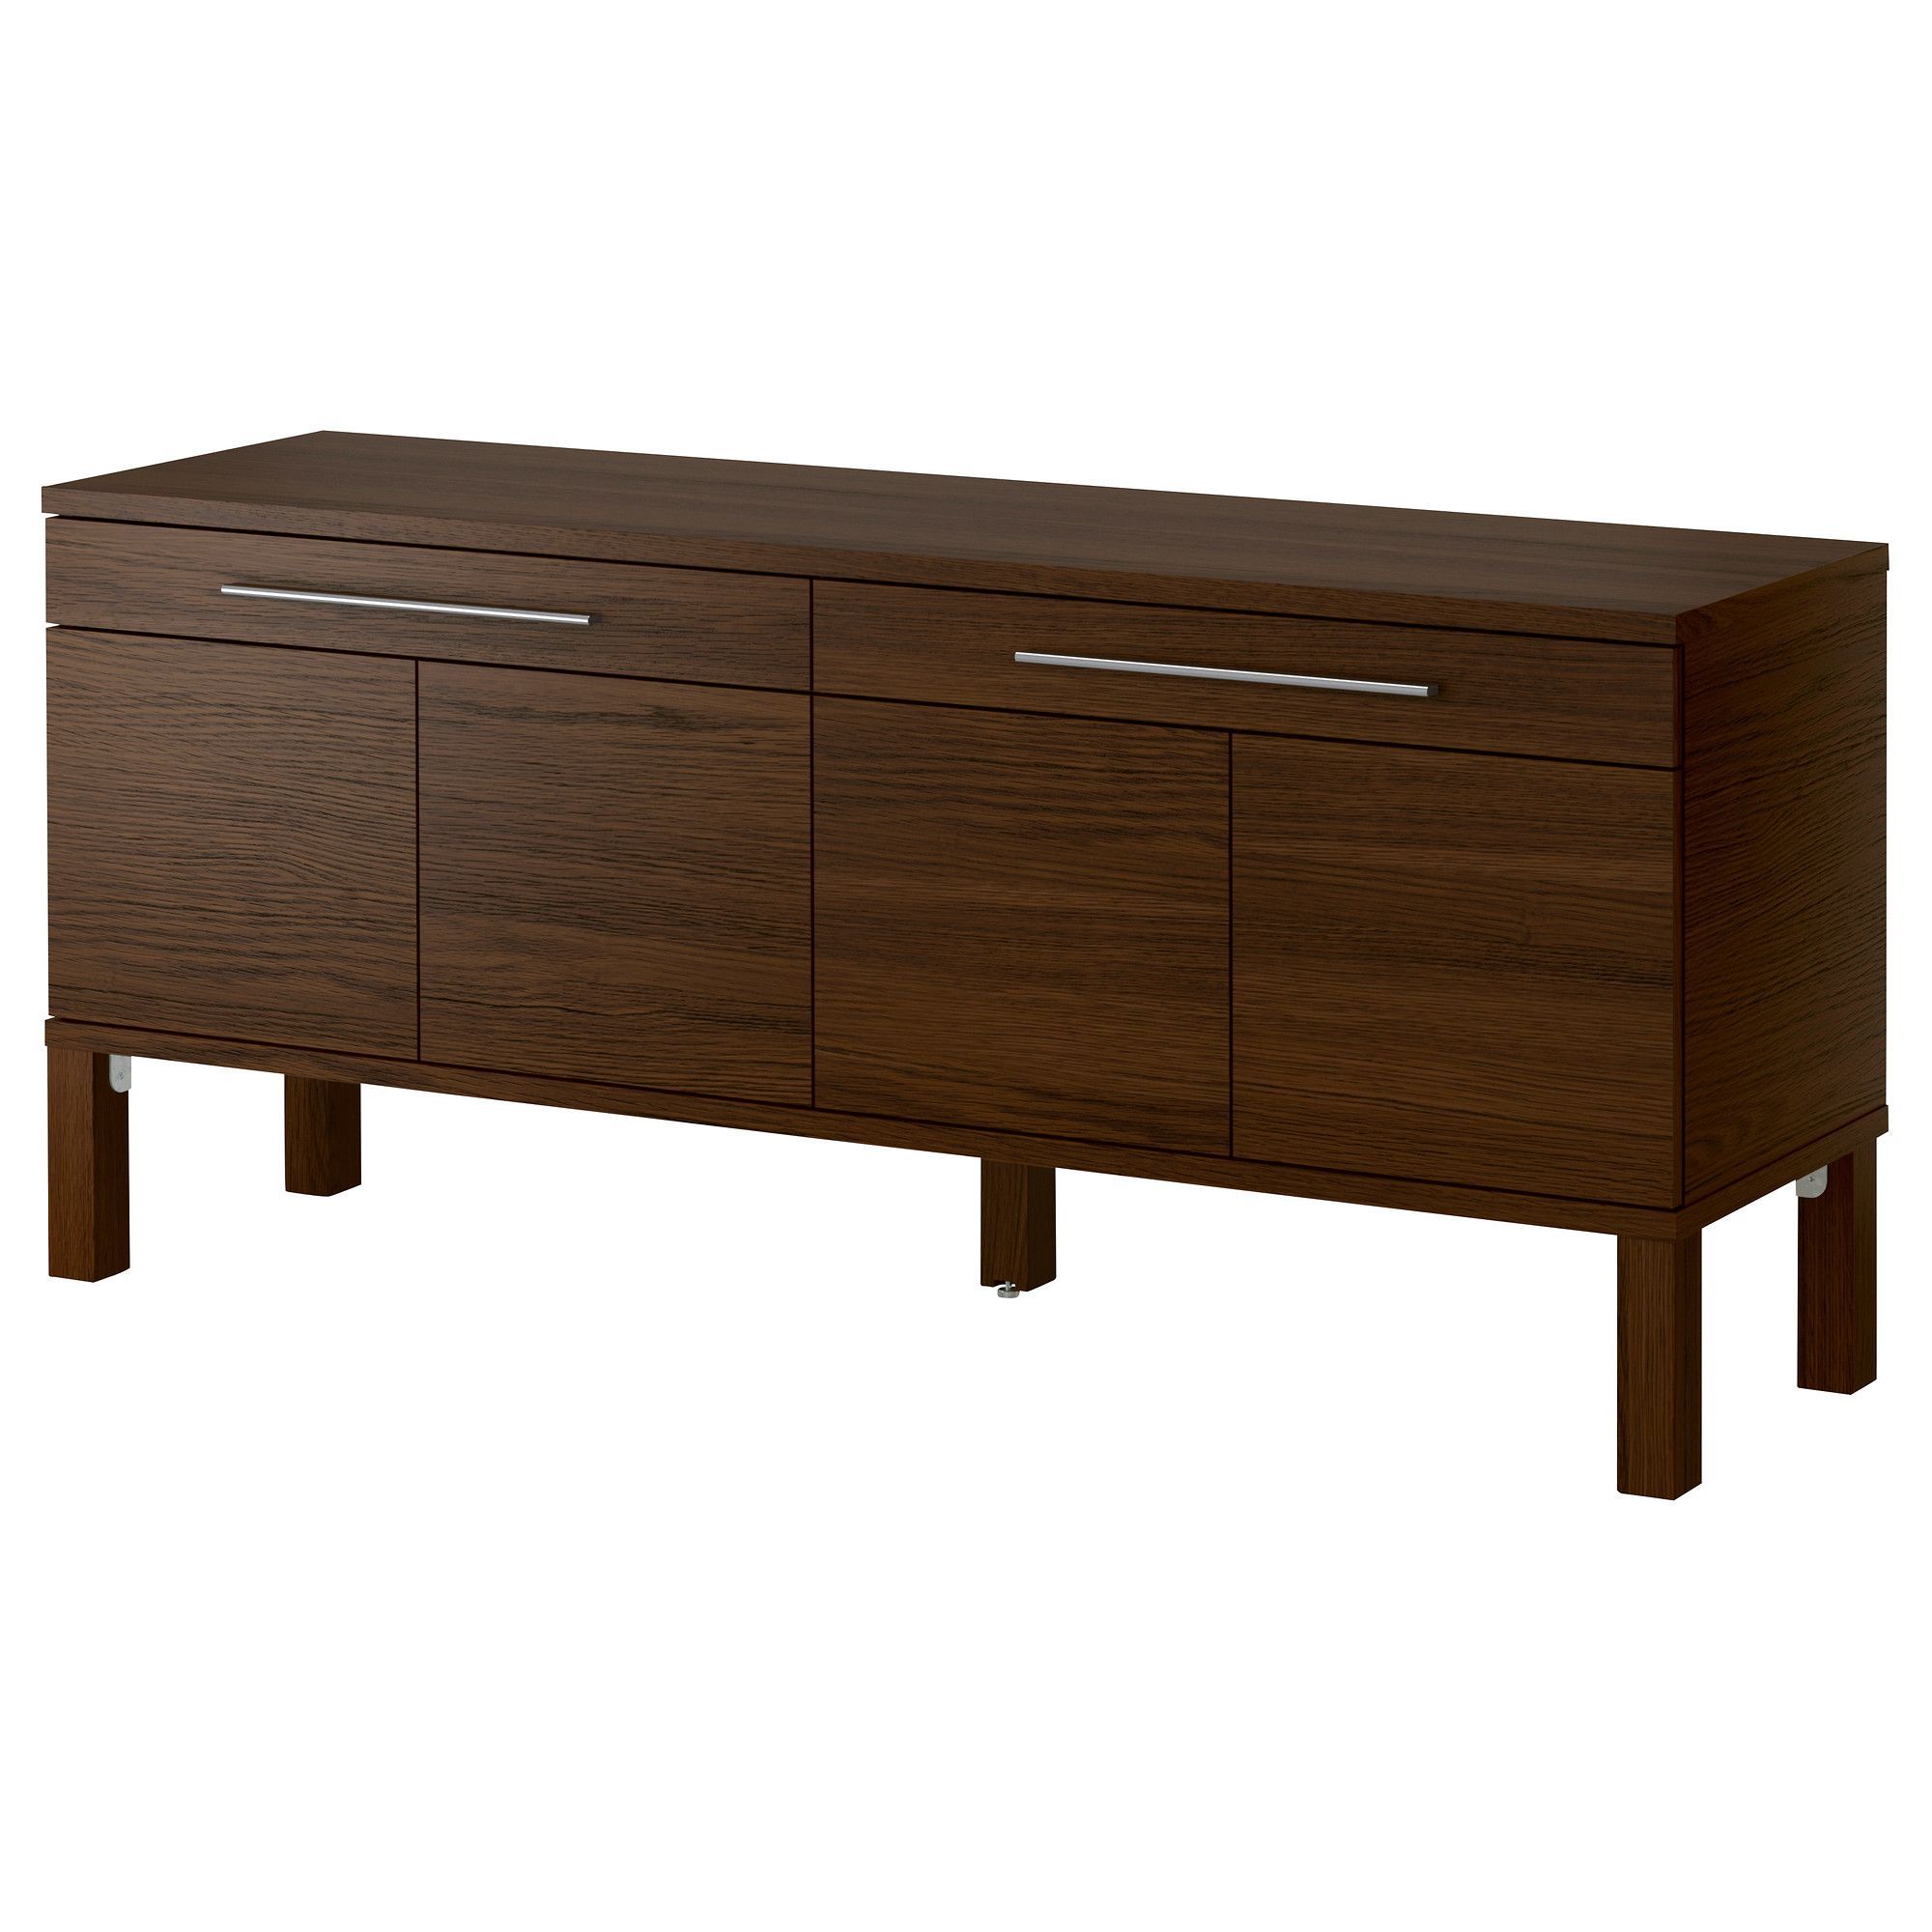 Featured Photo of The 30 Best Collection of Contemporary Wooden Buffets with One Side Door Storage Cabinets and Two Drawers